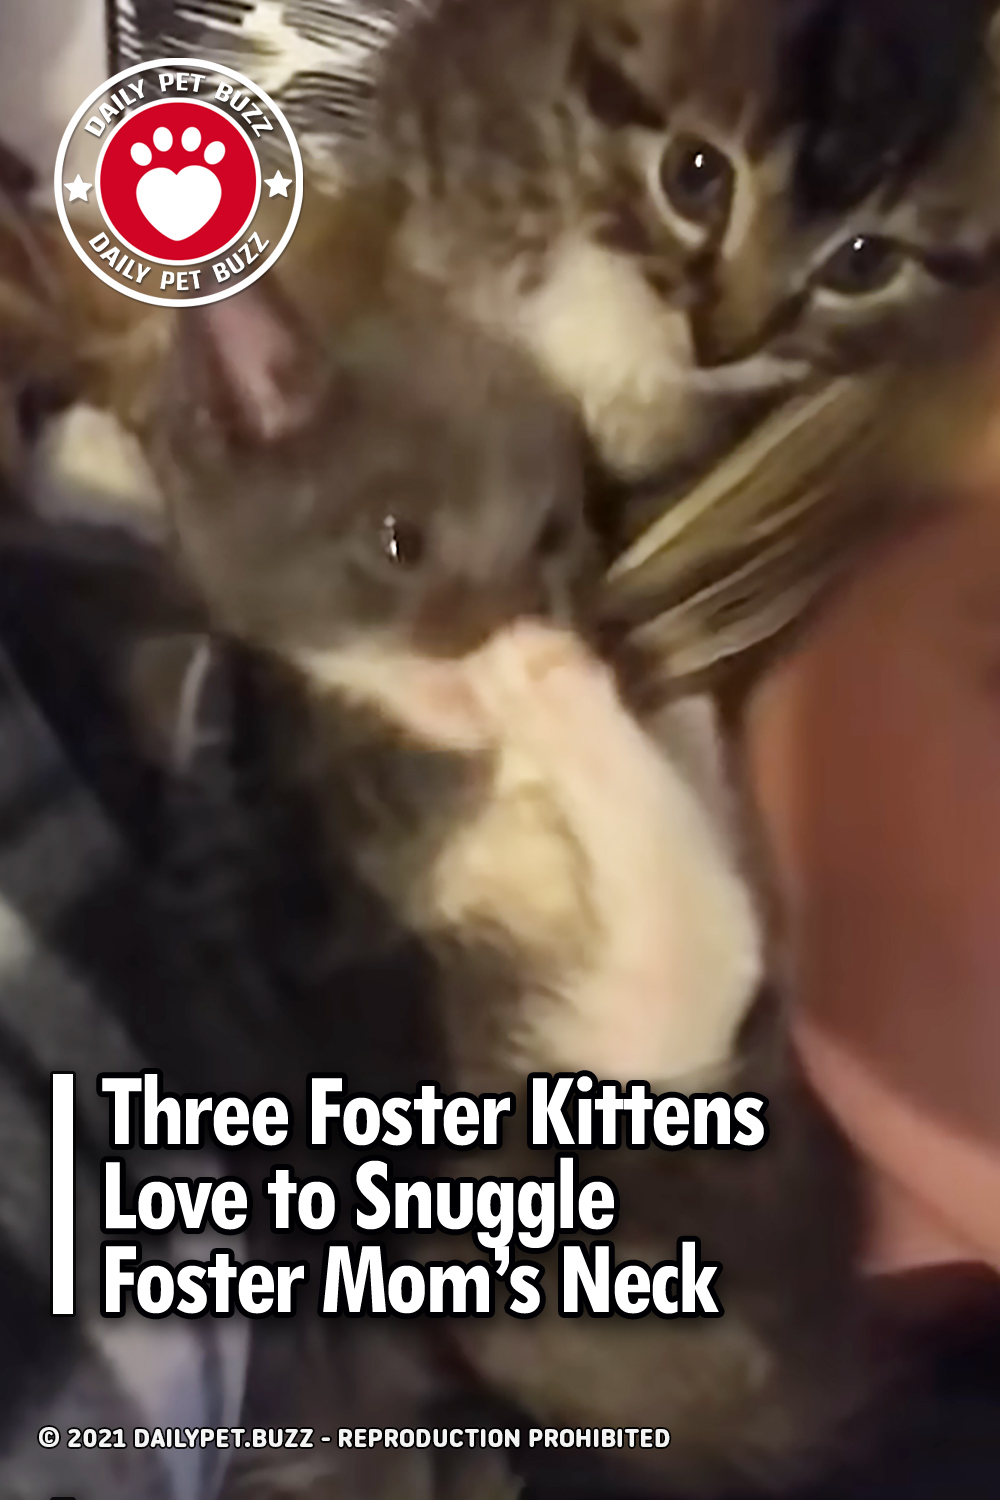 Three Foster Kittens Love to Snuggle Foster Mom’s Neck